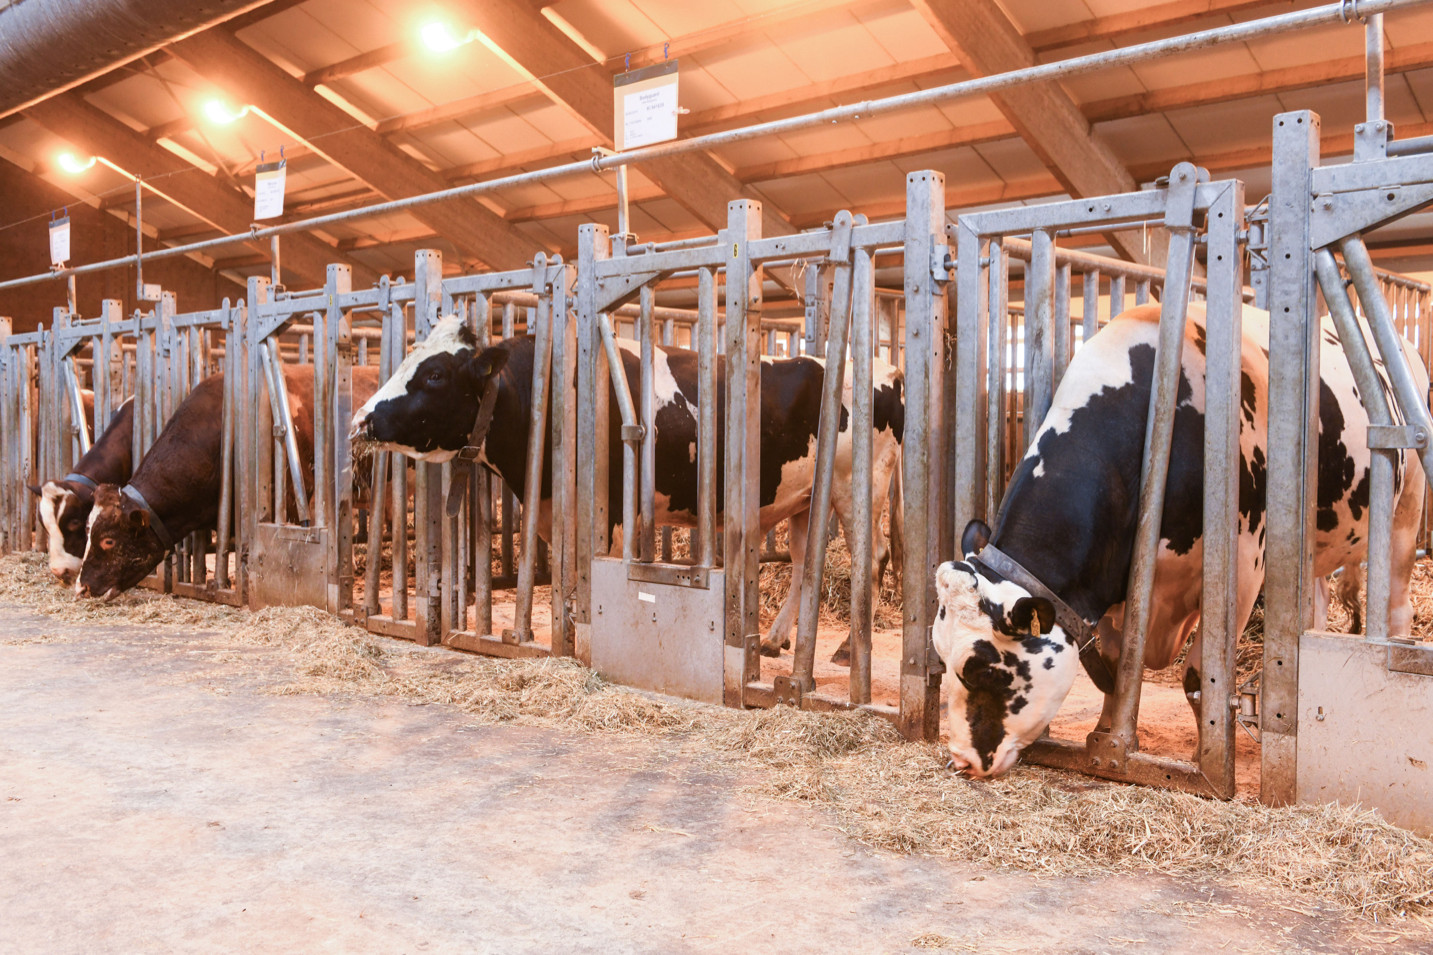 CRV’s facility for bulls in Harfsen has been extensively renovated